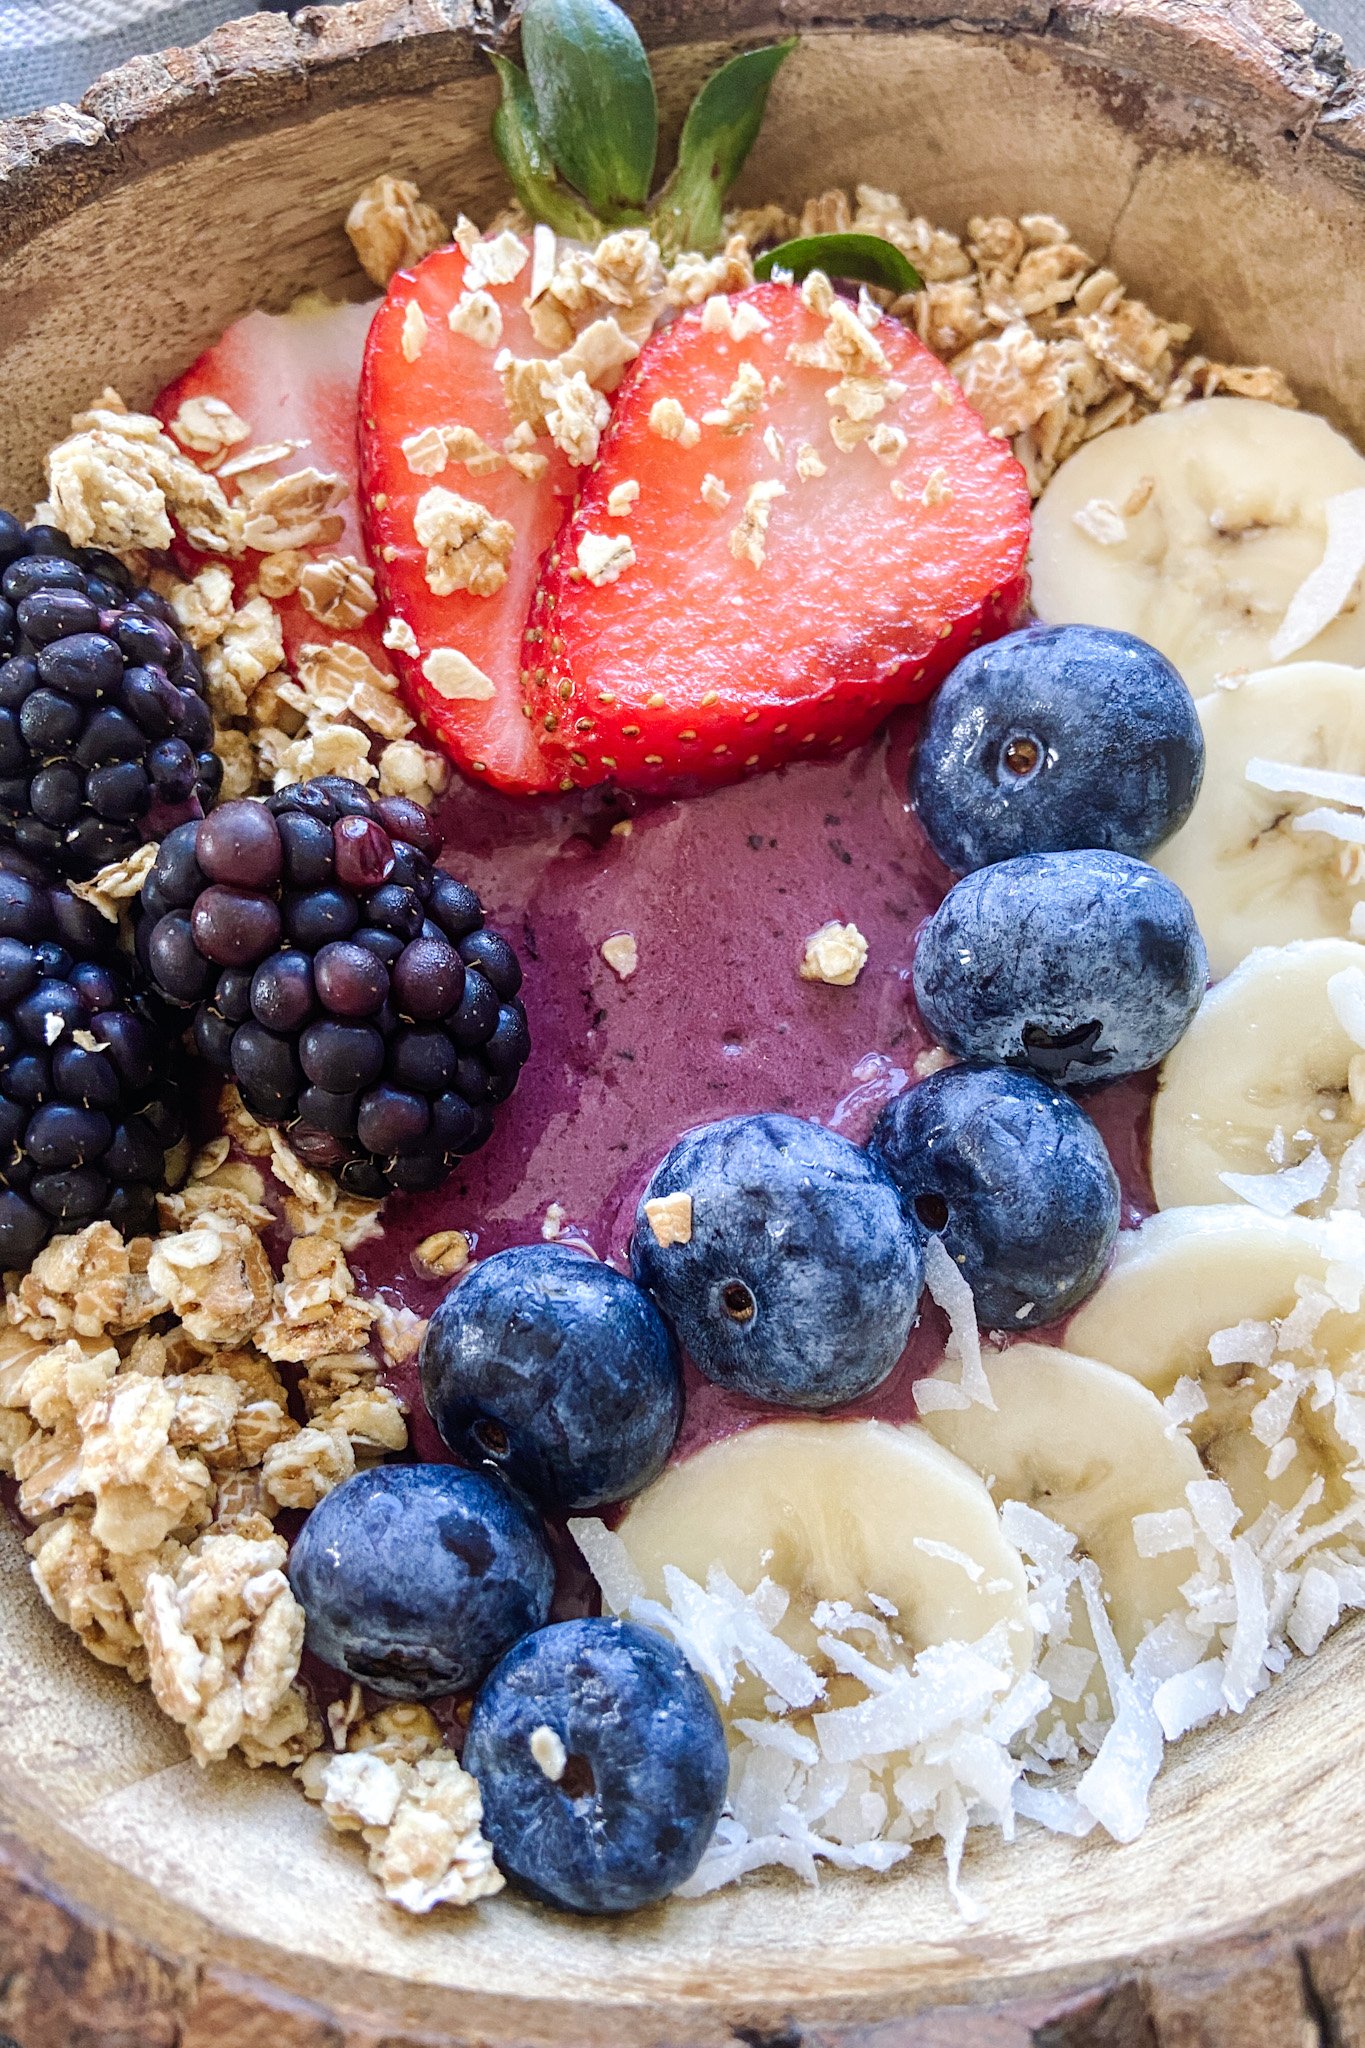 Acai bowl topped with granola, sliced bananas, blueberries, blackberries and strawberries